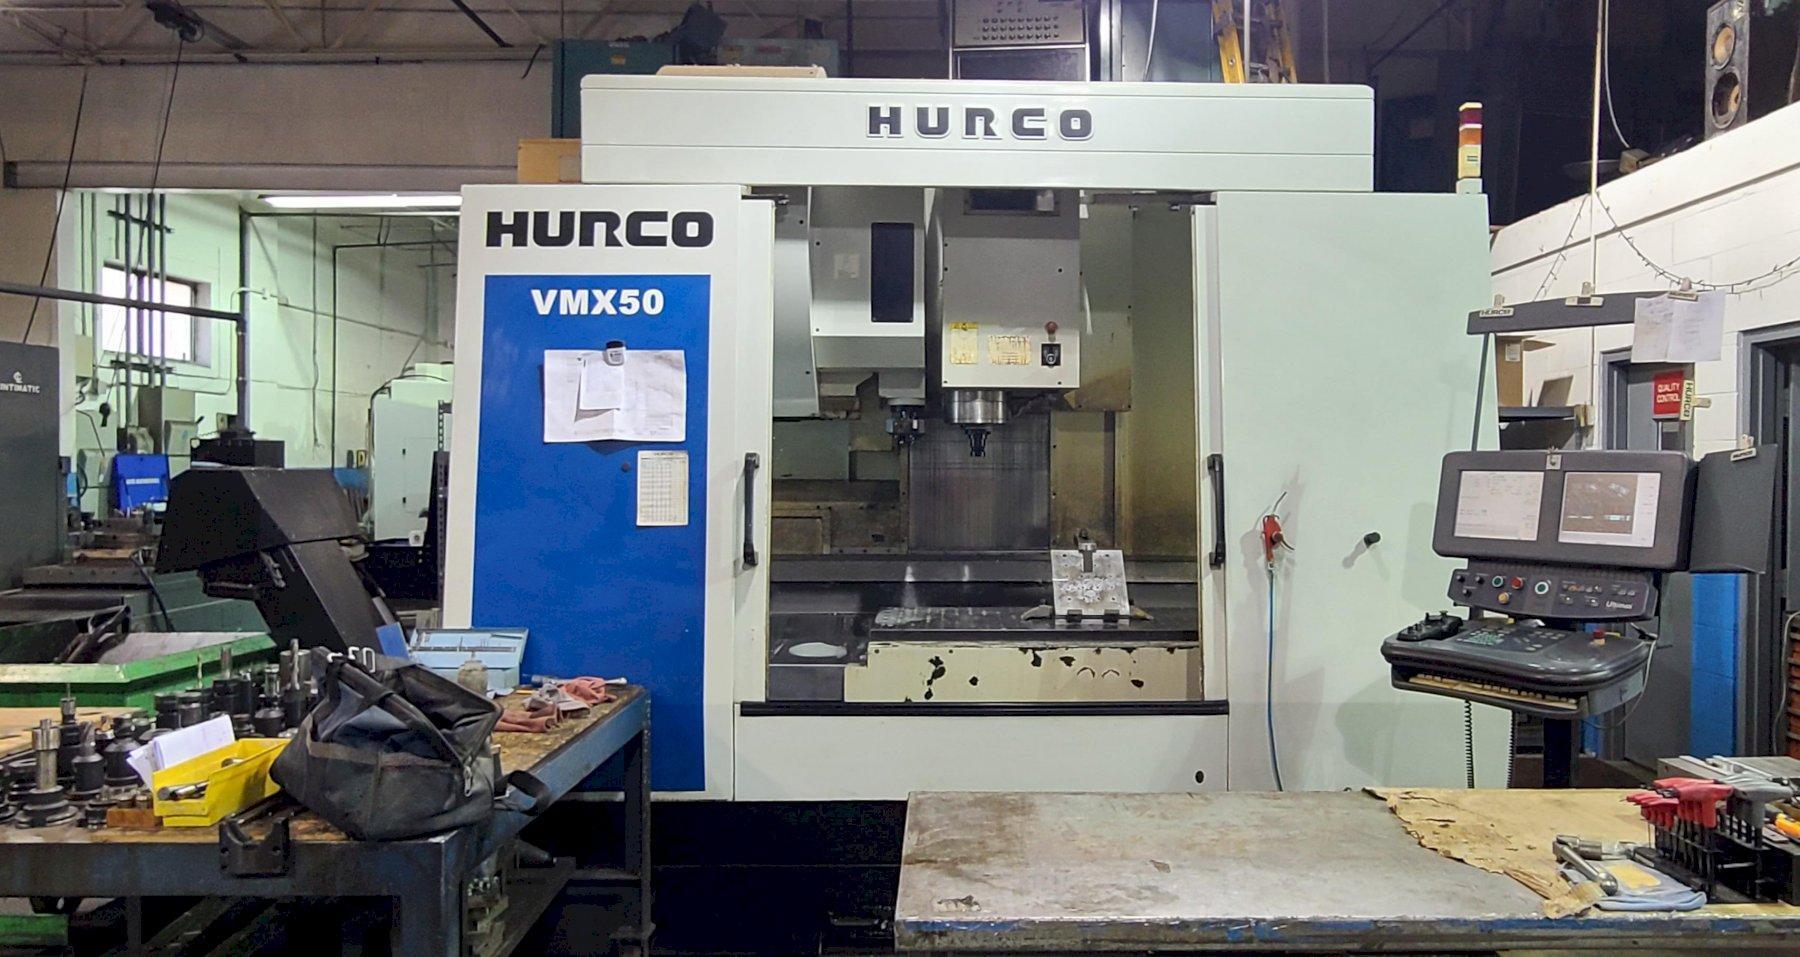 Hurco VMX-50 Used CNC Vertical Machining Center For Sale - 2008